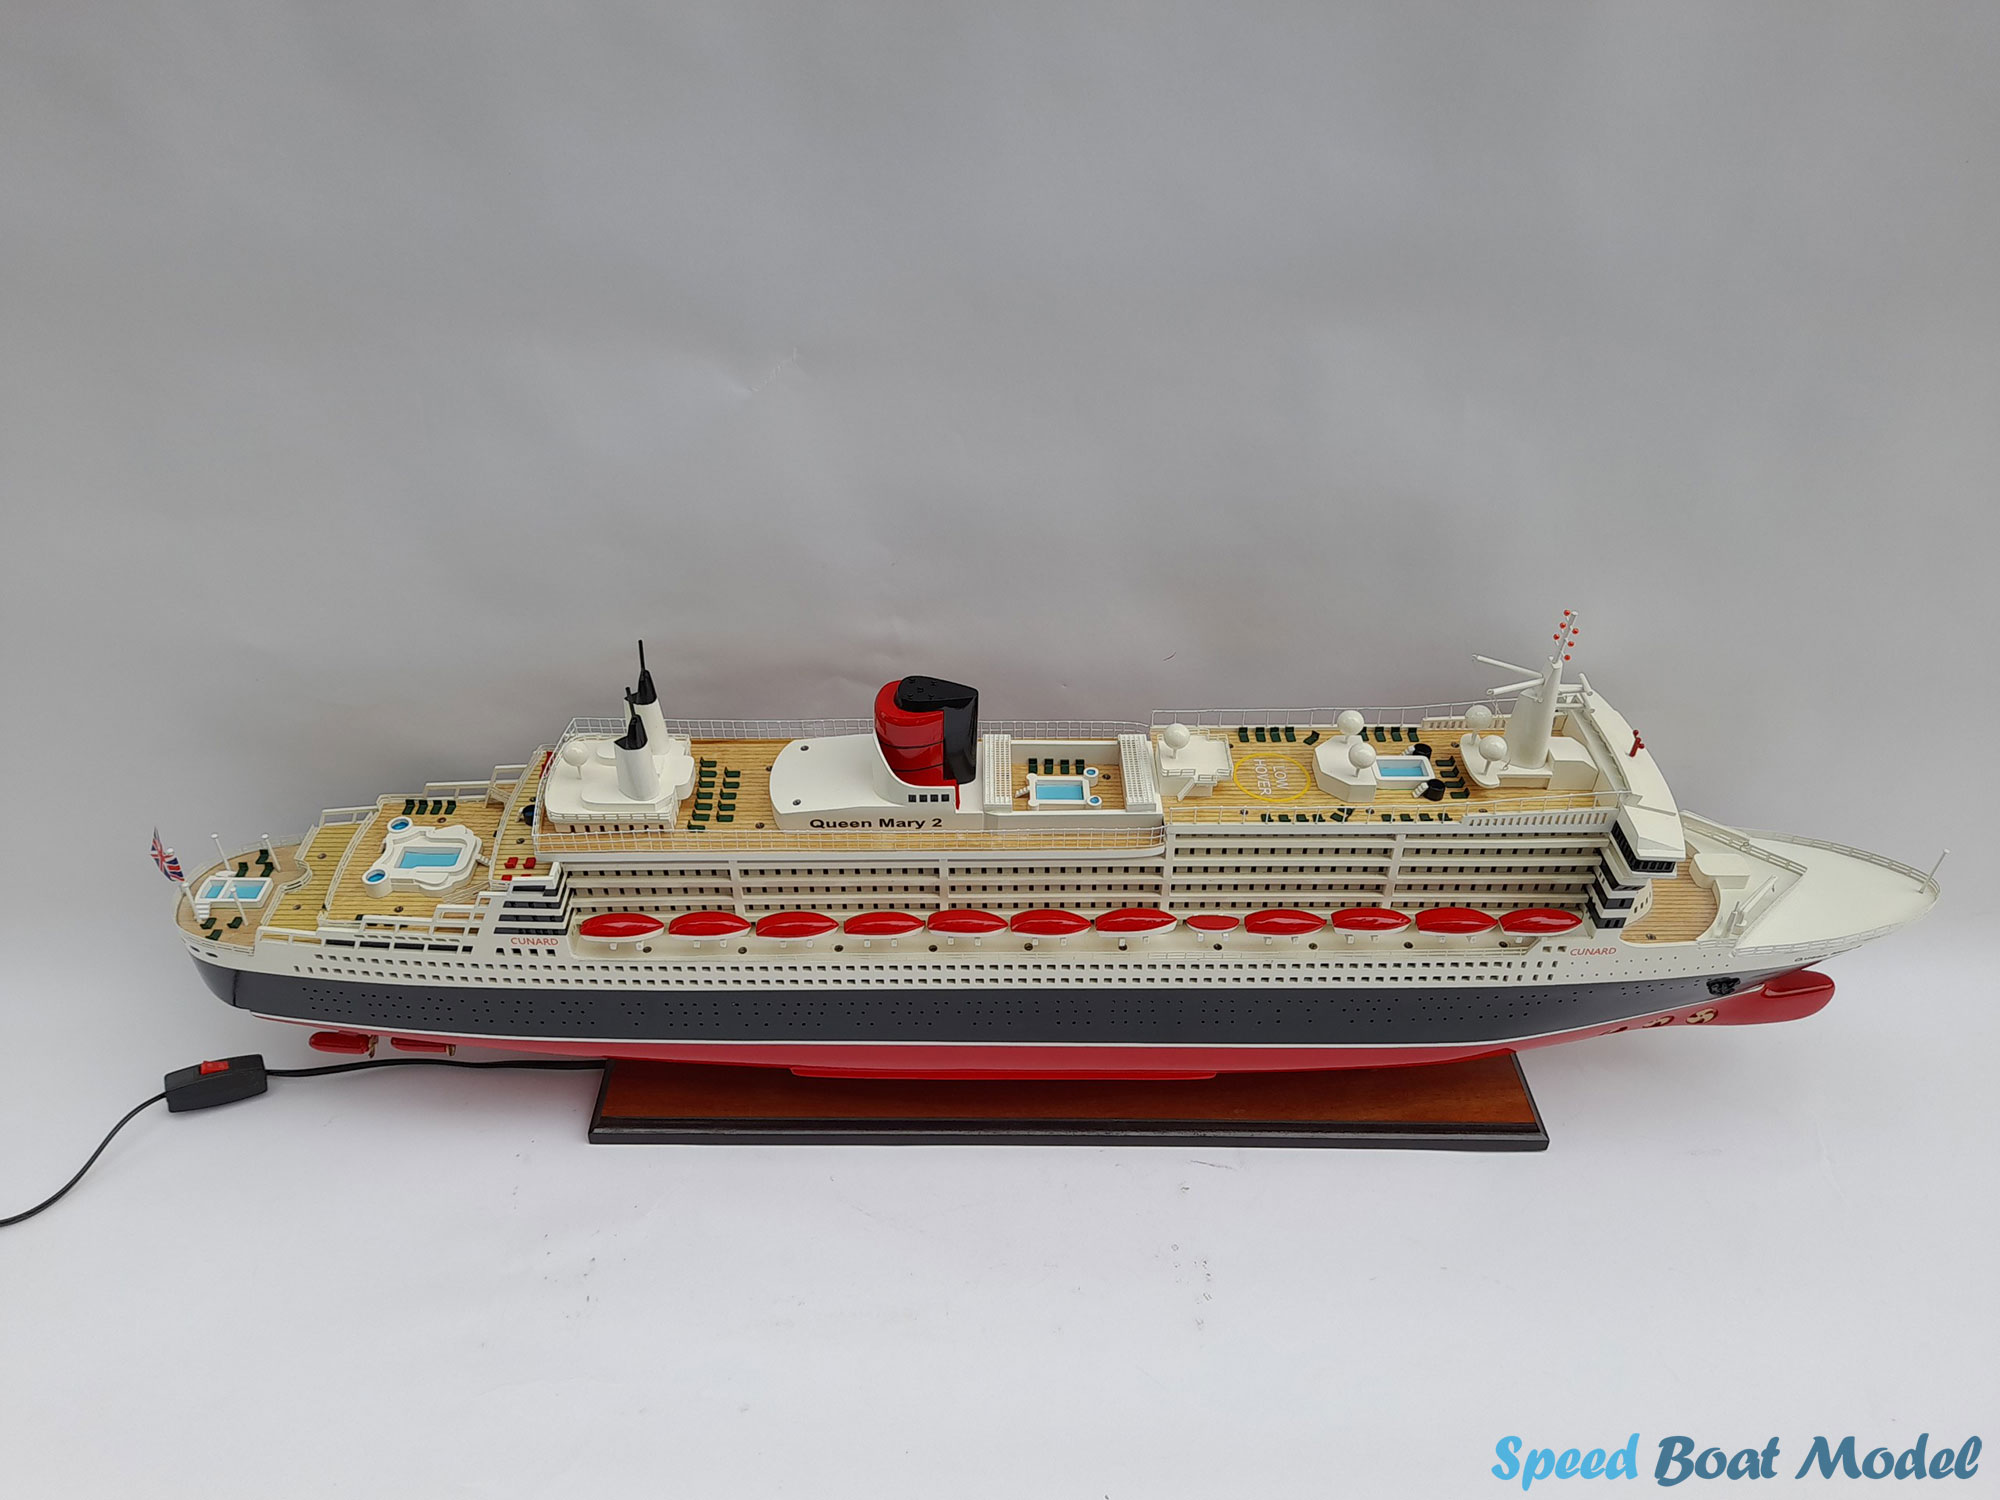 Rms Queen Mary Cruise Liner Model 39.3